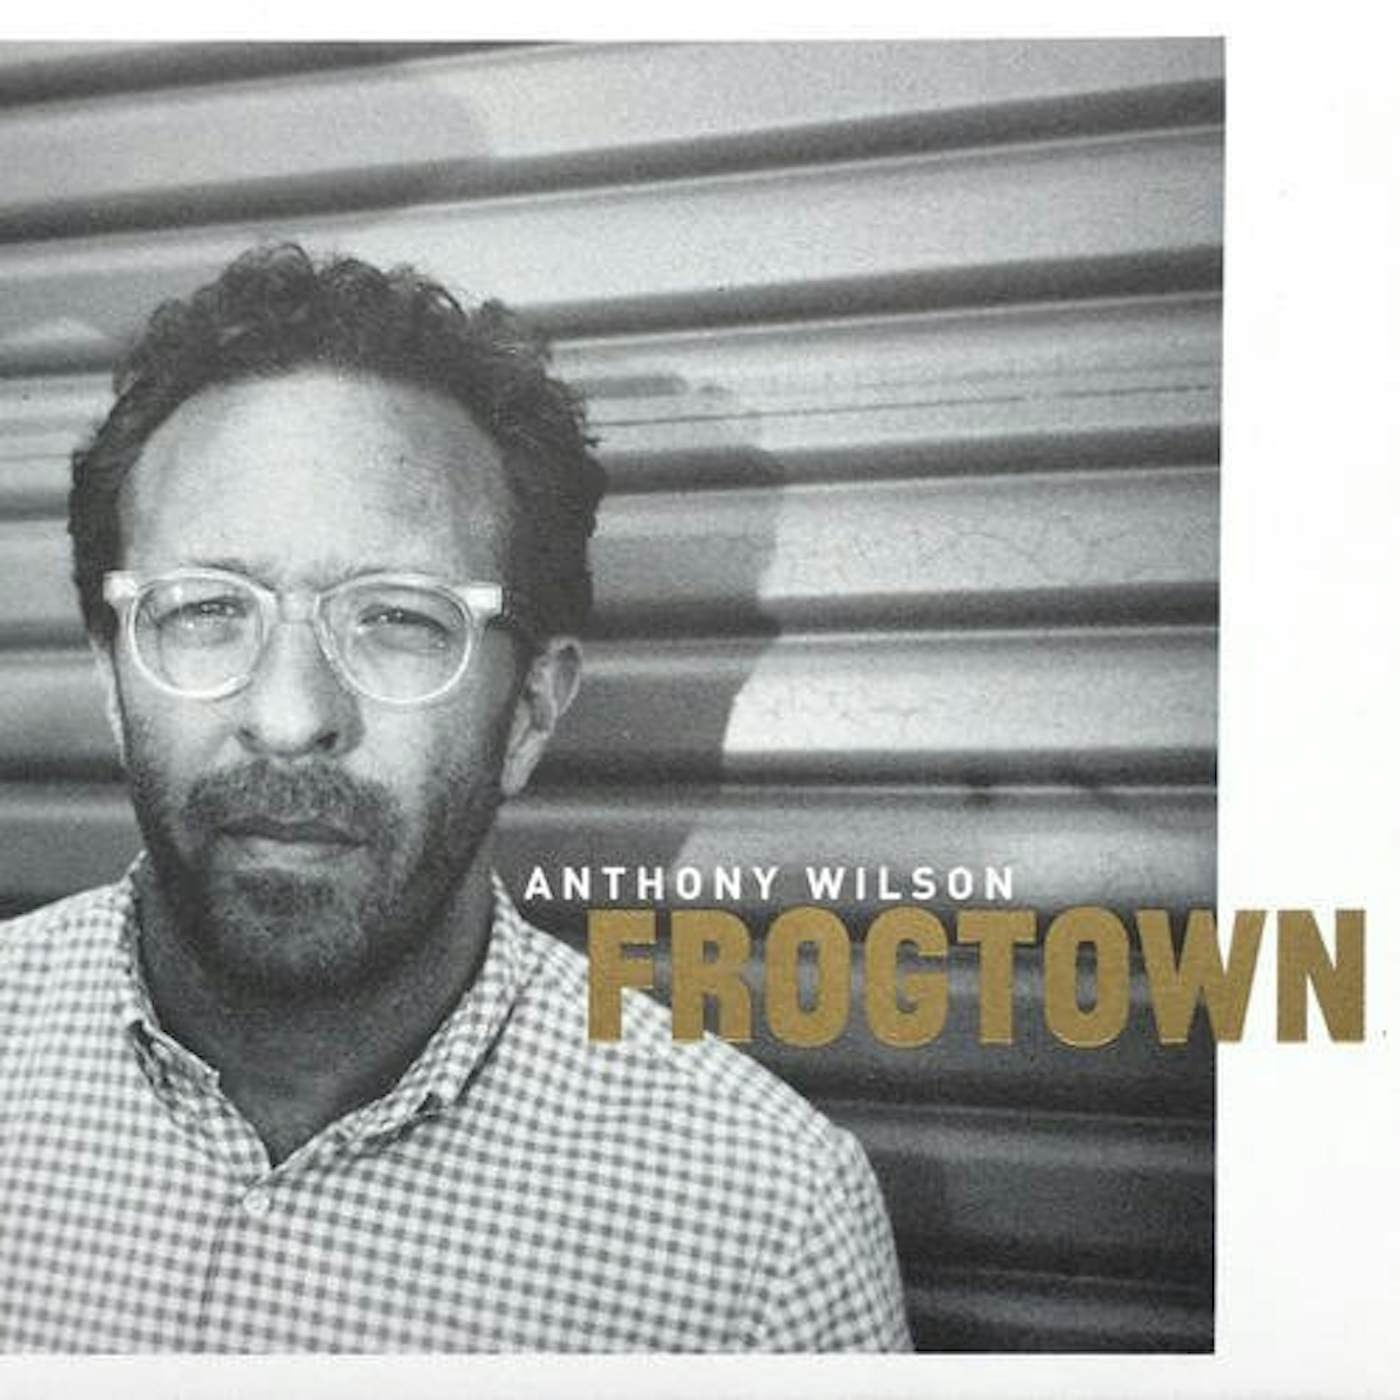 Anthony Wilson FROGTOWN CD